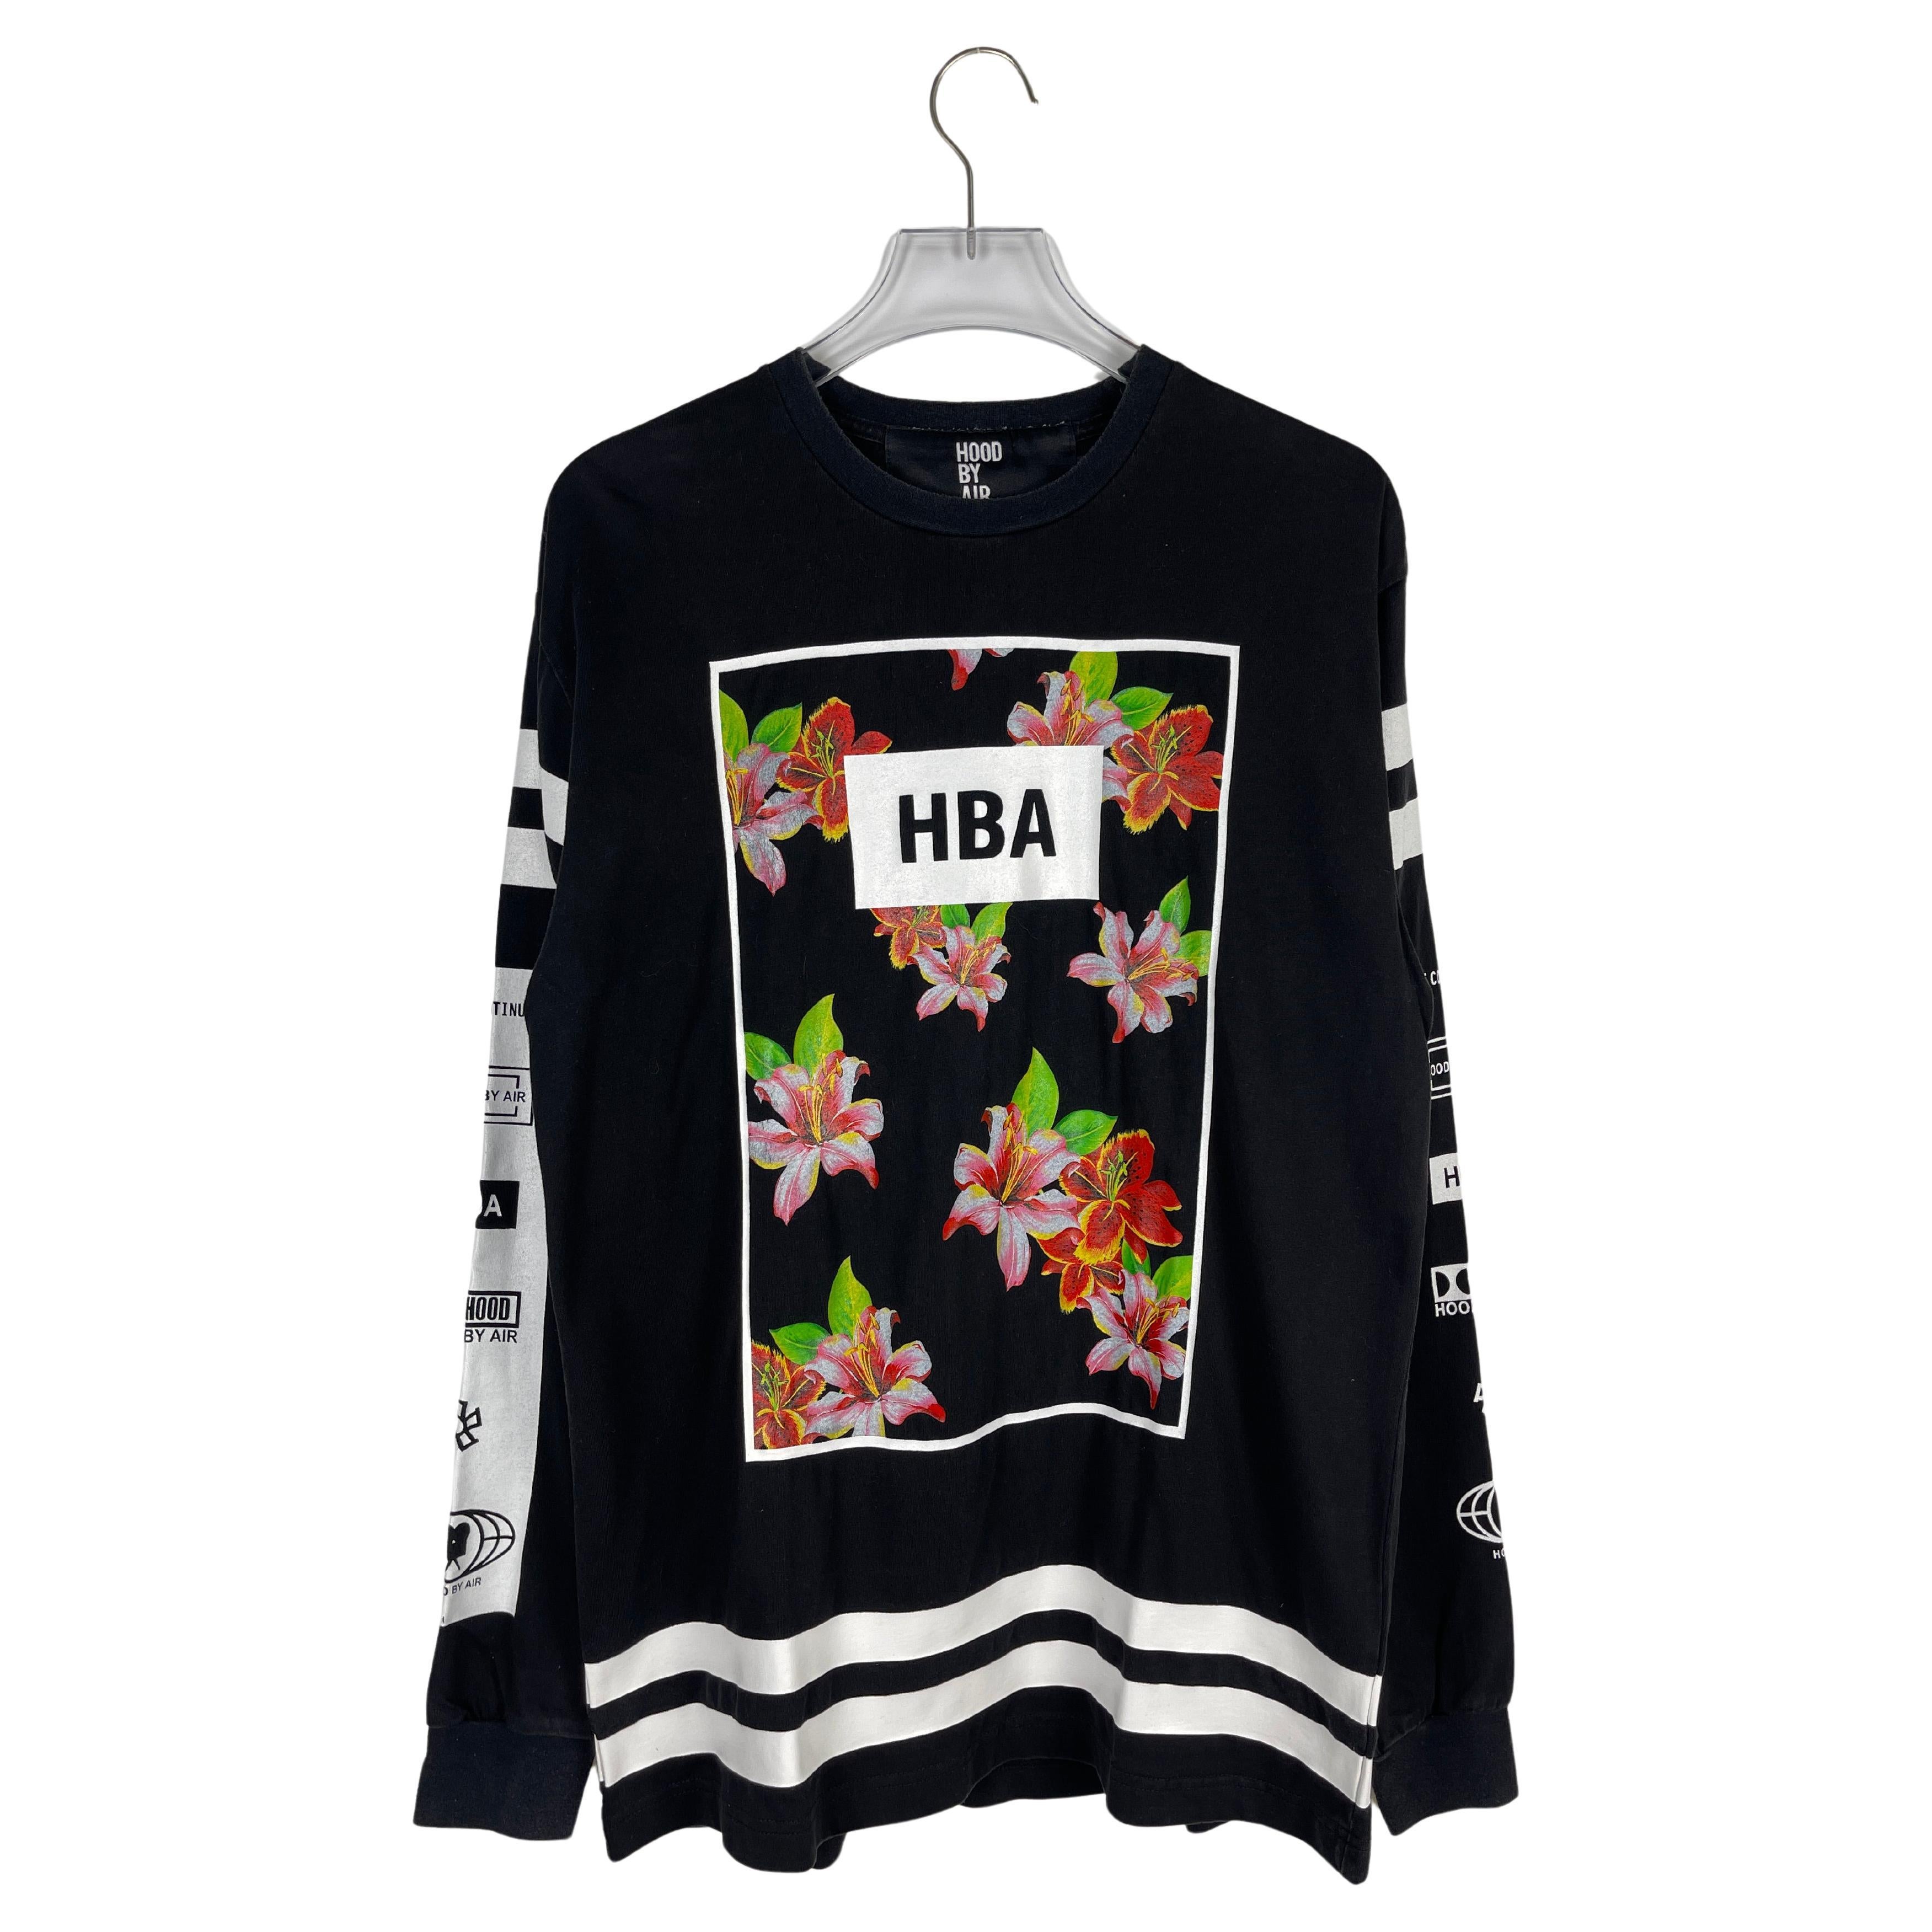 Hood By Air S/S2013 Flower 69 T-Shirt For Sale